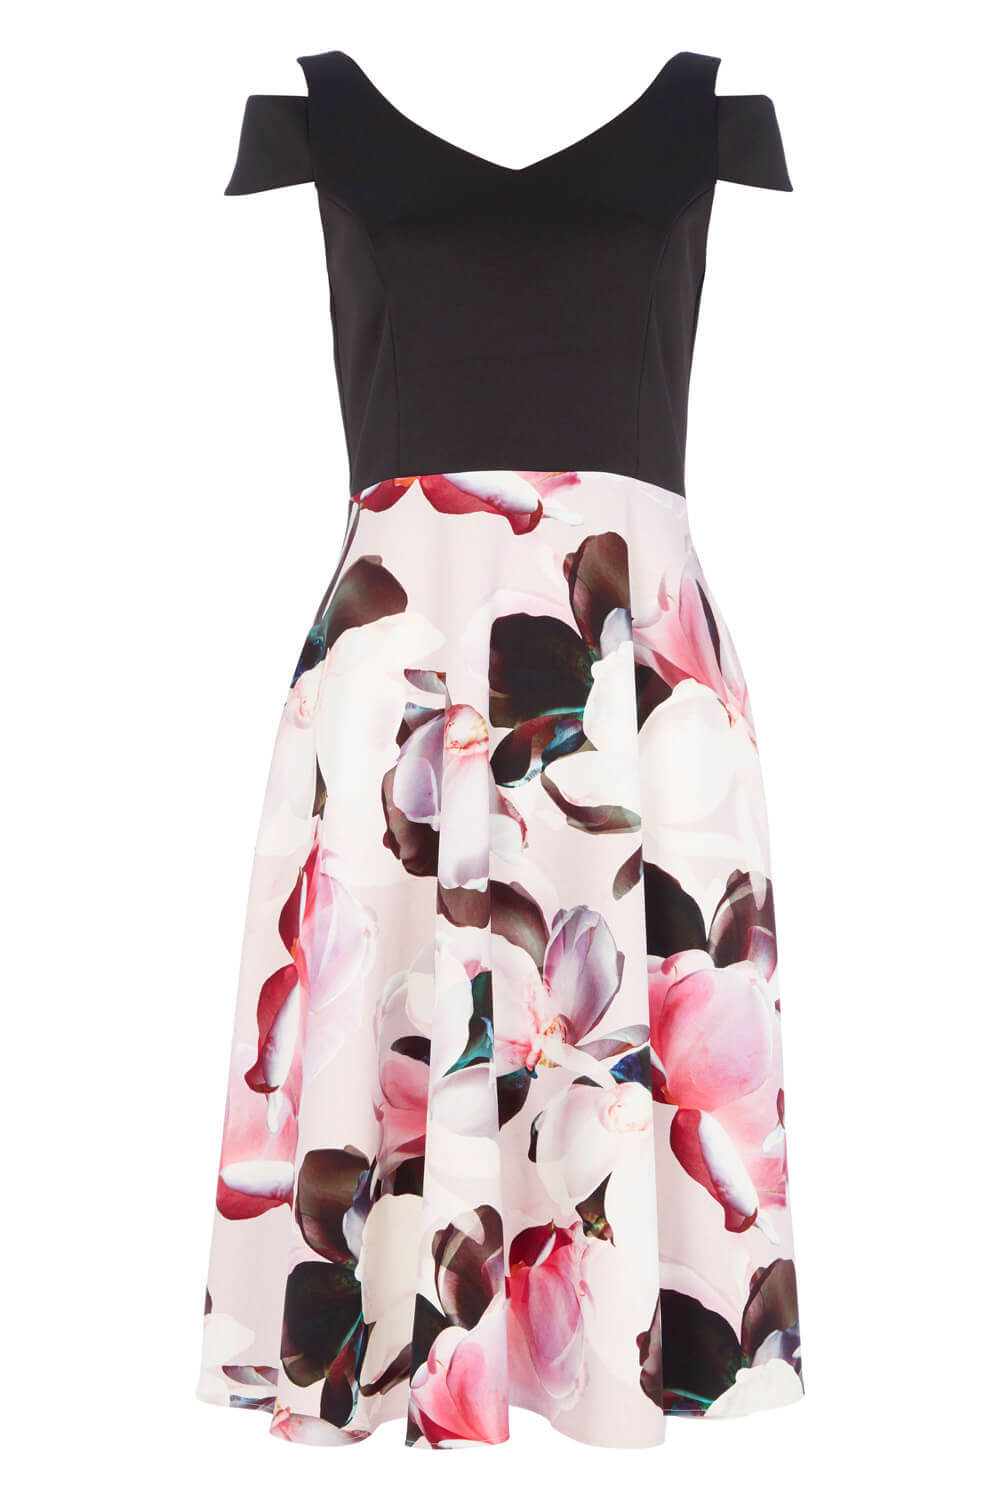 Black Fit and Flare Print Skirt Dress, Image 4 of 4